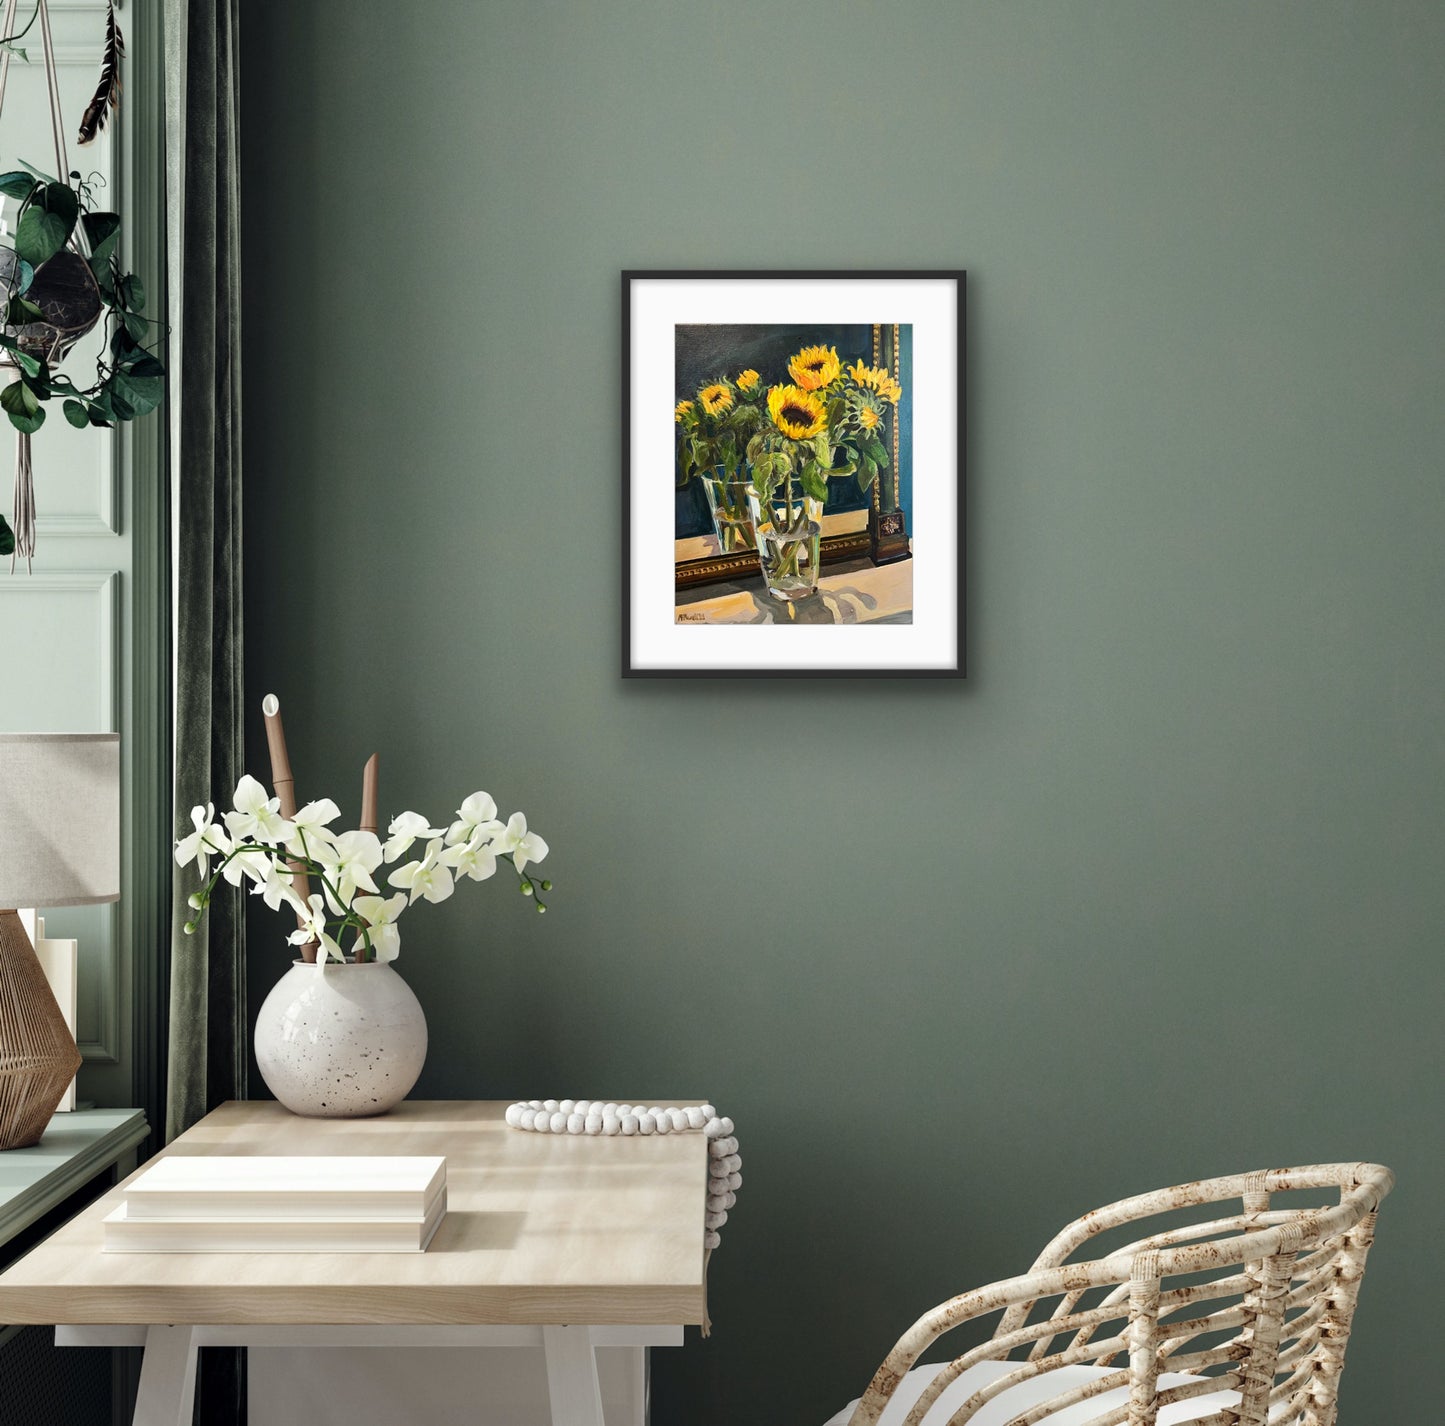 Antique Mirror and Sunflowers - Print